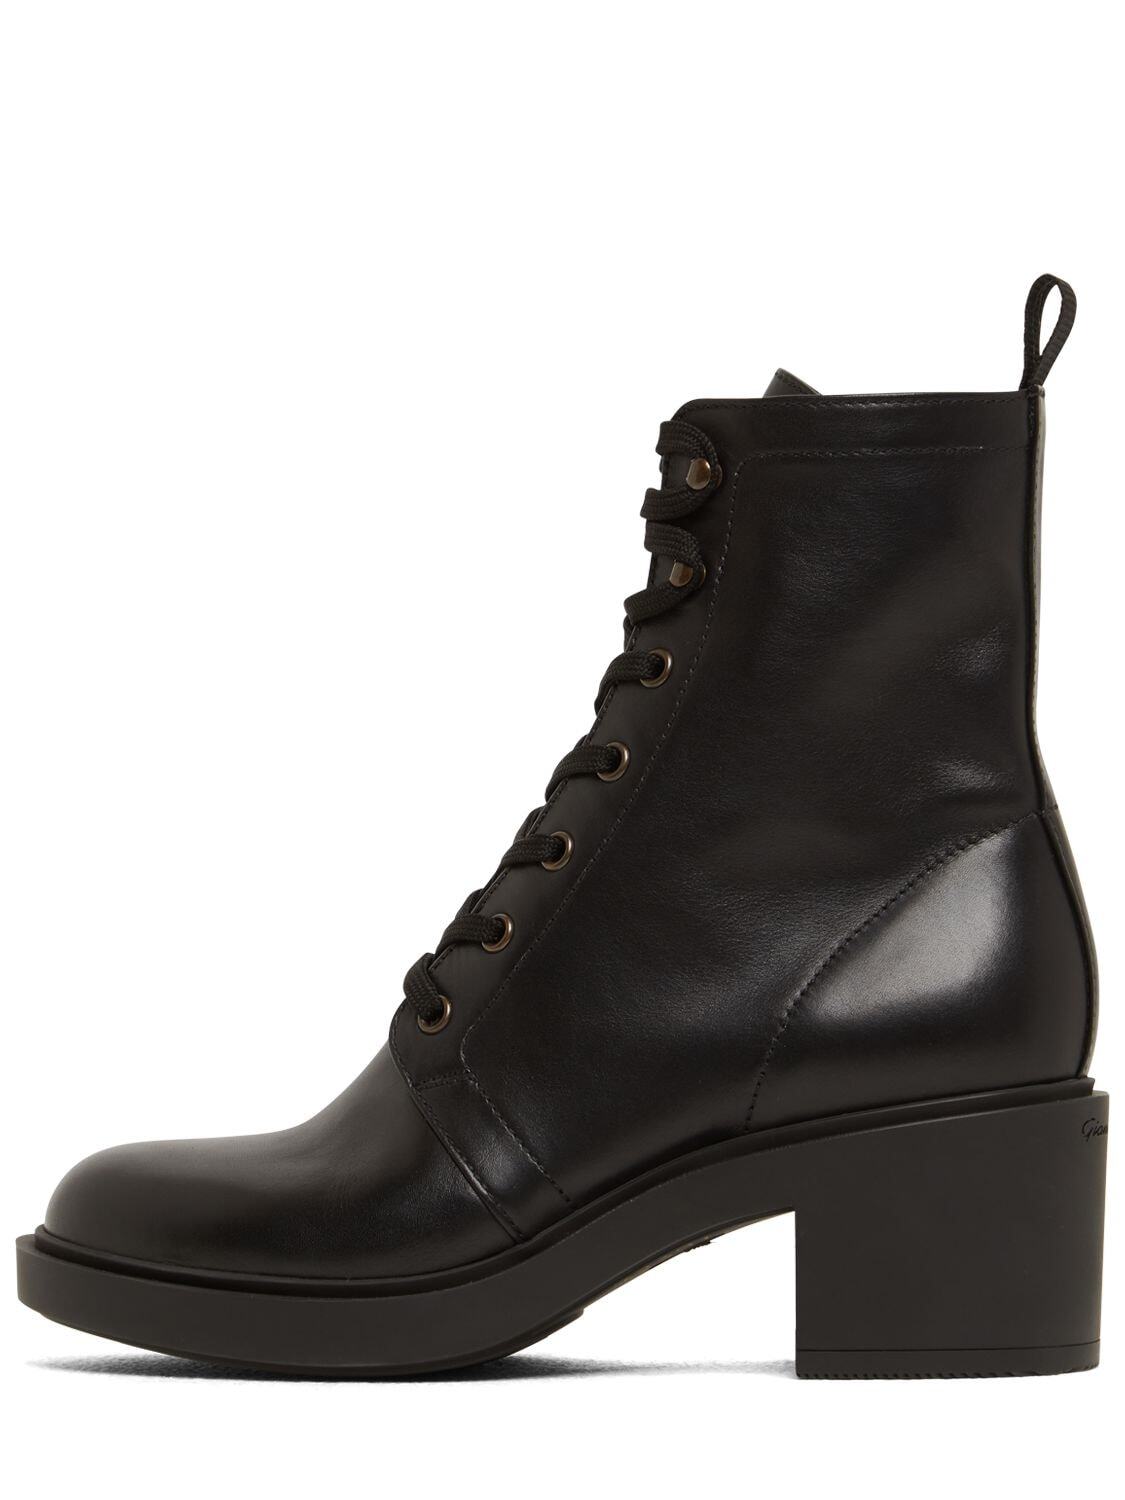 GIANVITO ROSSI 60mm Foster Leather Ankle Boots in black